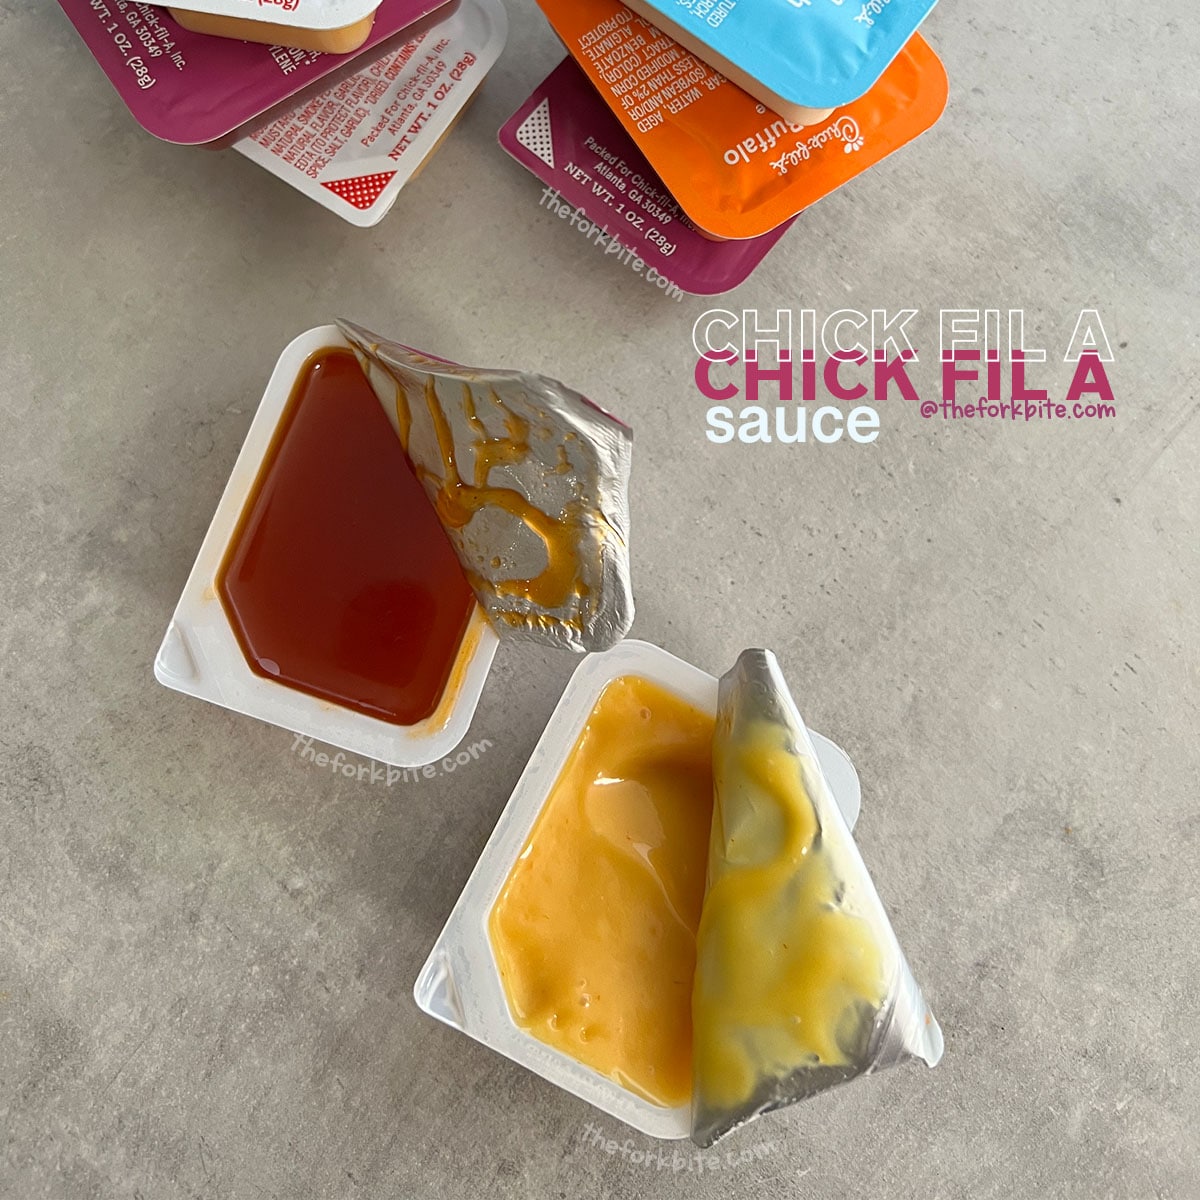 Yes, the sauce from Chick-fil-A does – indeed – expire. The time it lasts depends heavily upon how the sauce is packaged.